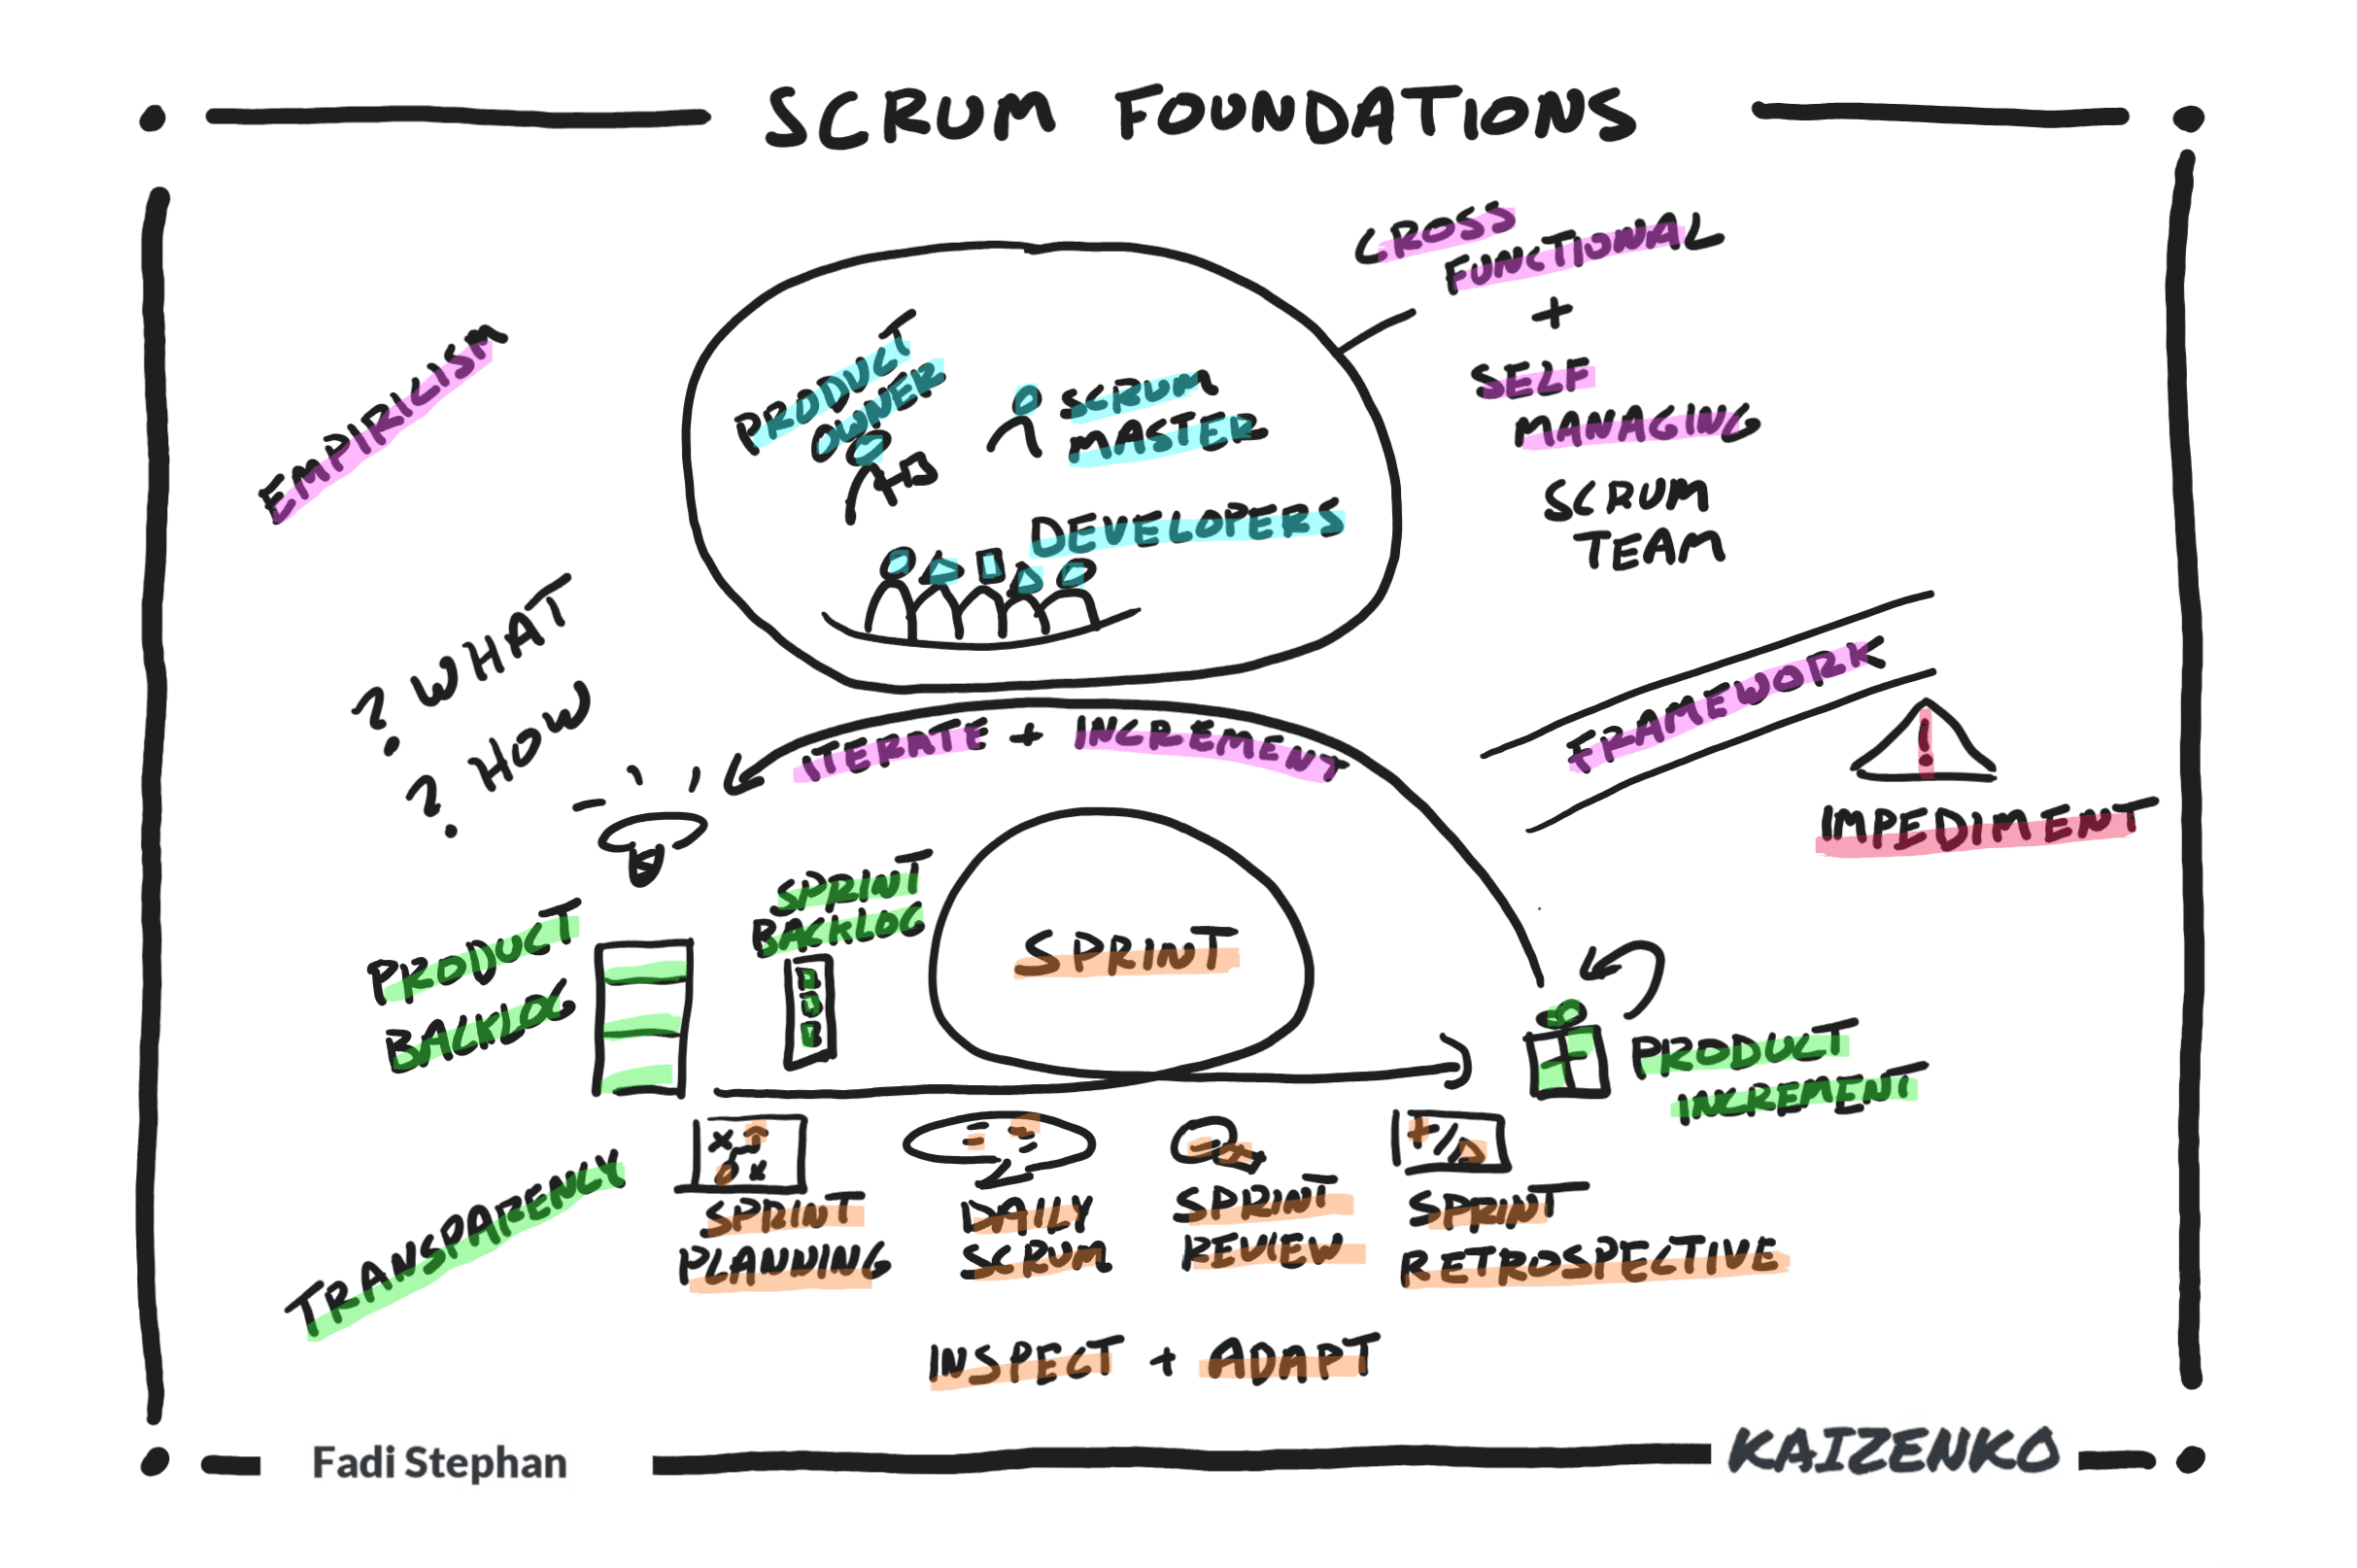 Scrum Foundations and Theory in a Nutshell